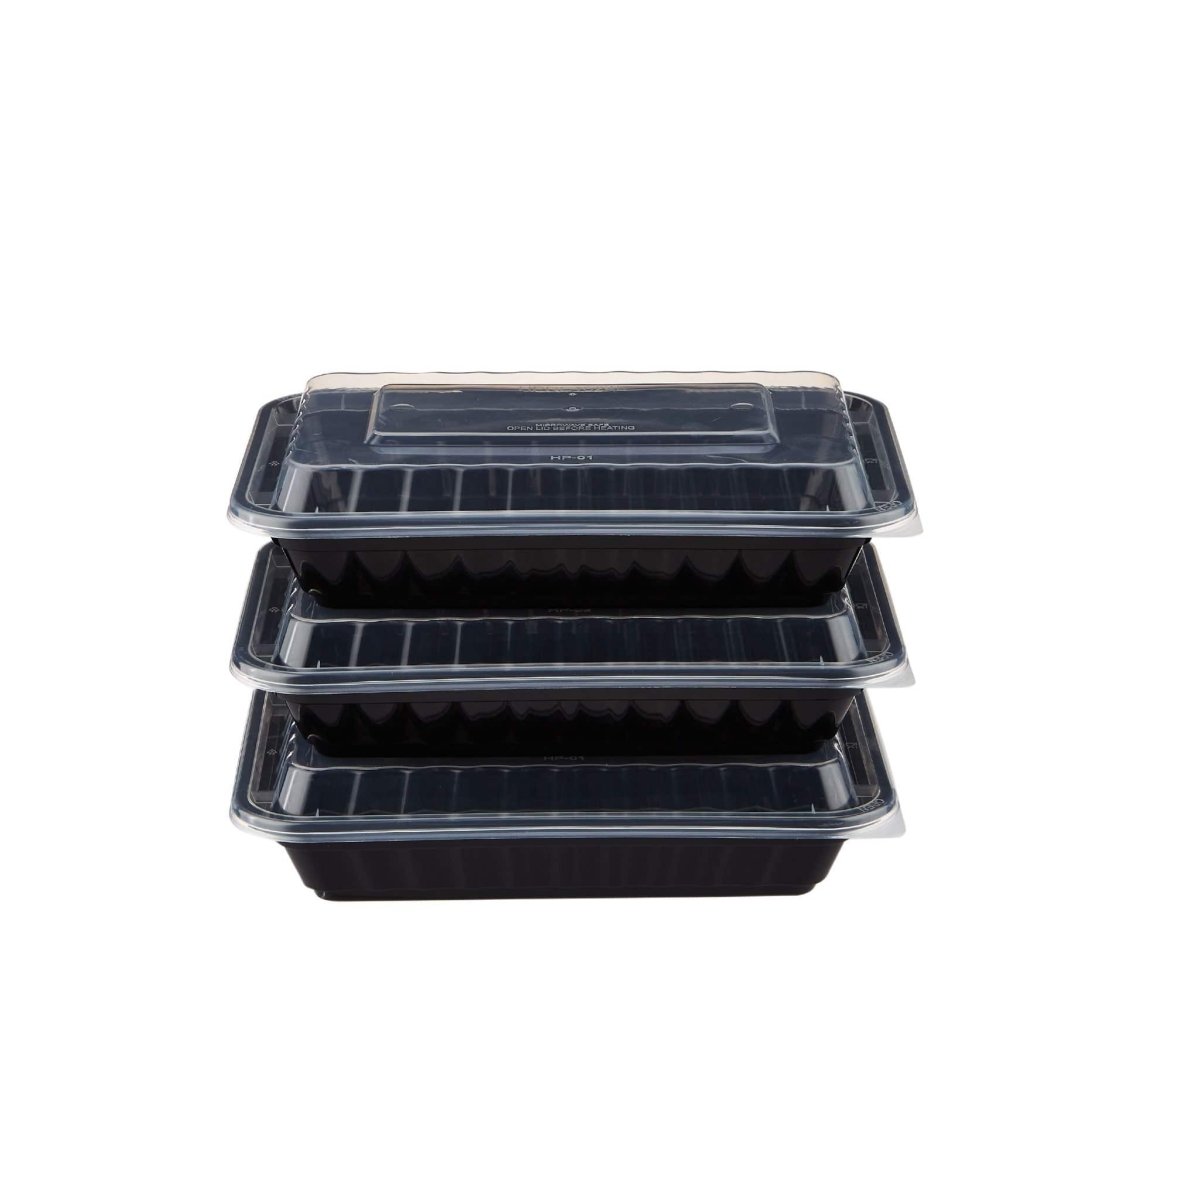 Black Base Rectangular Container 16 Oz 300 Pieces - hotpackwebstore.com - Black Base Containers